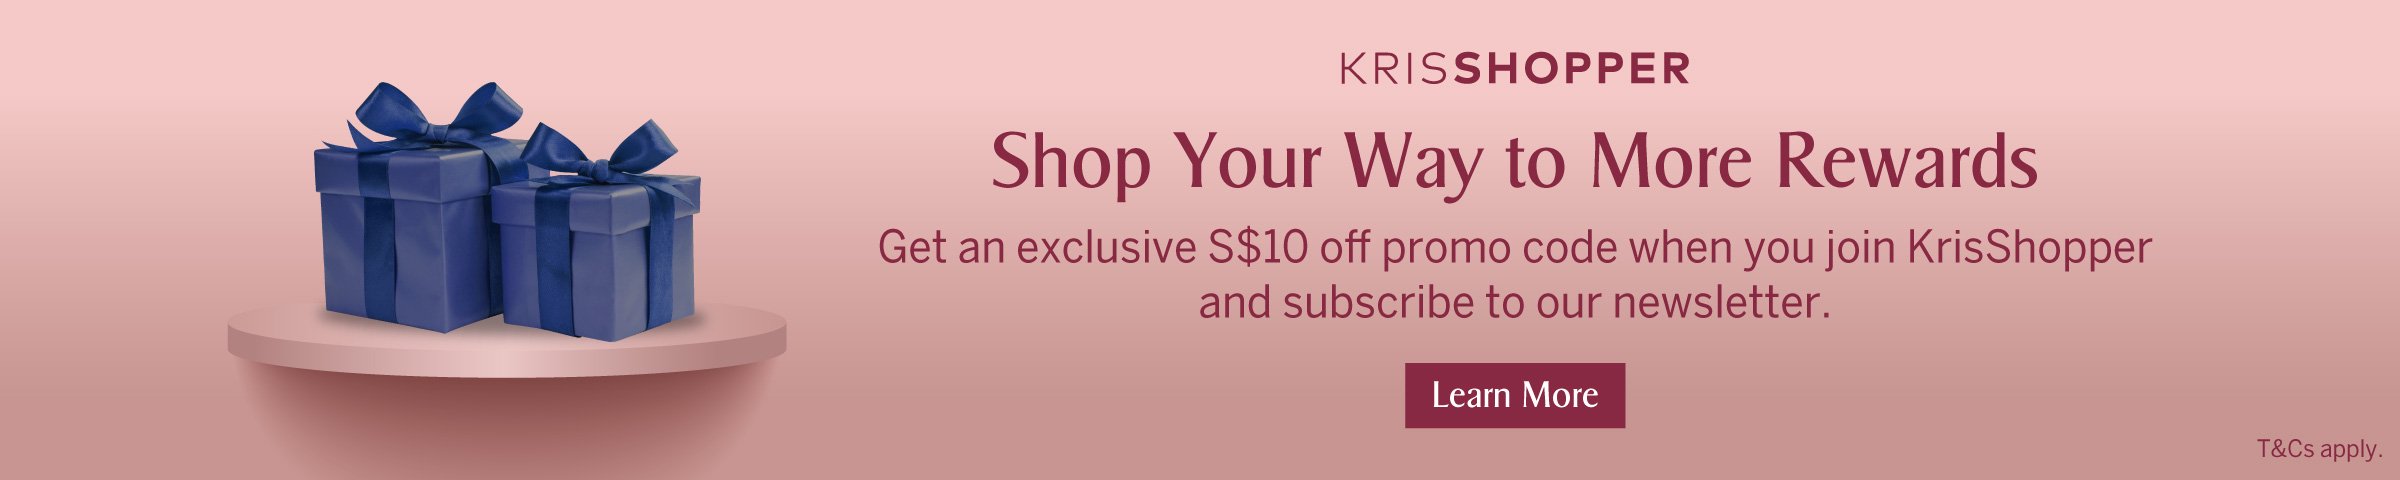 KrisShopper Exclusive - Get S$10 off promo code when you sign up